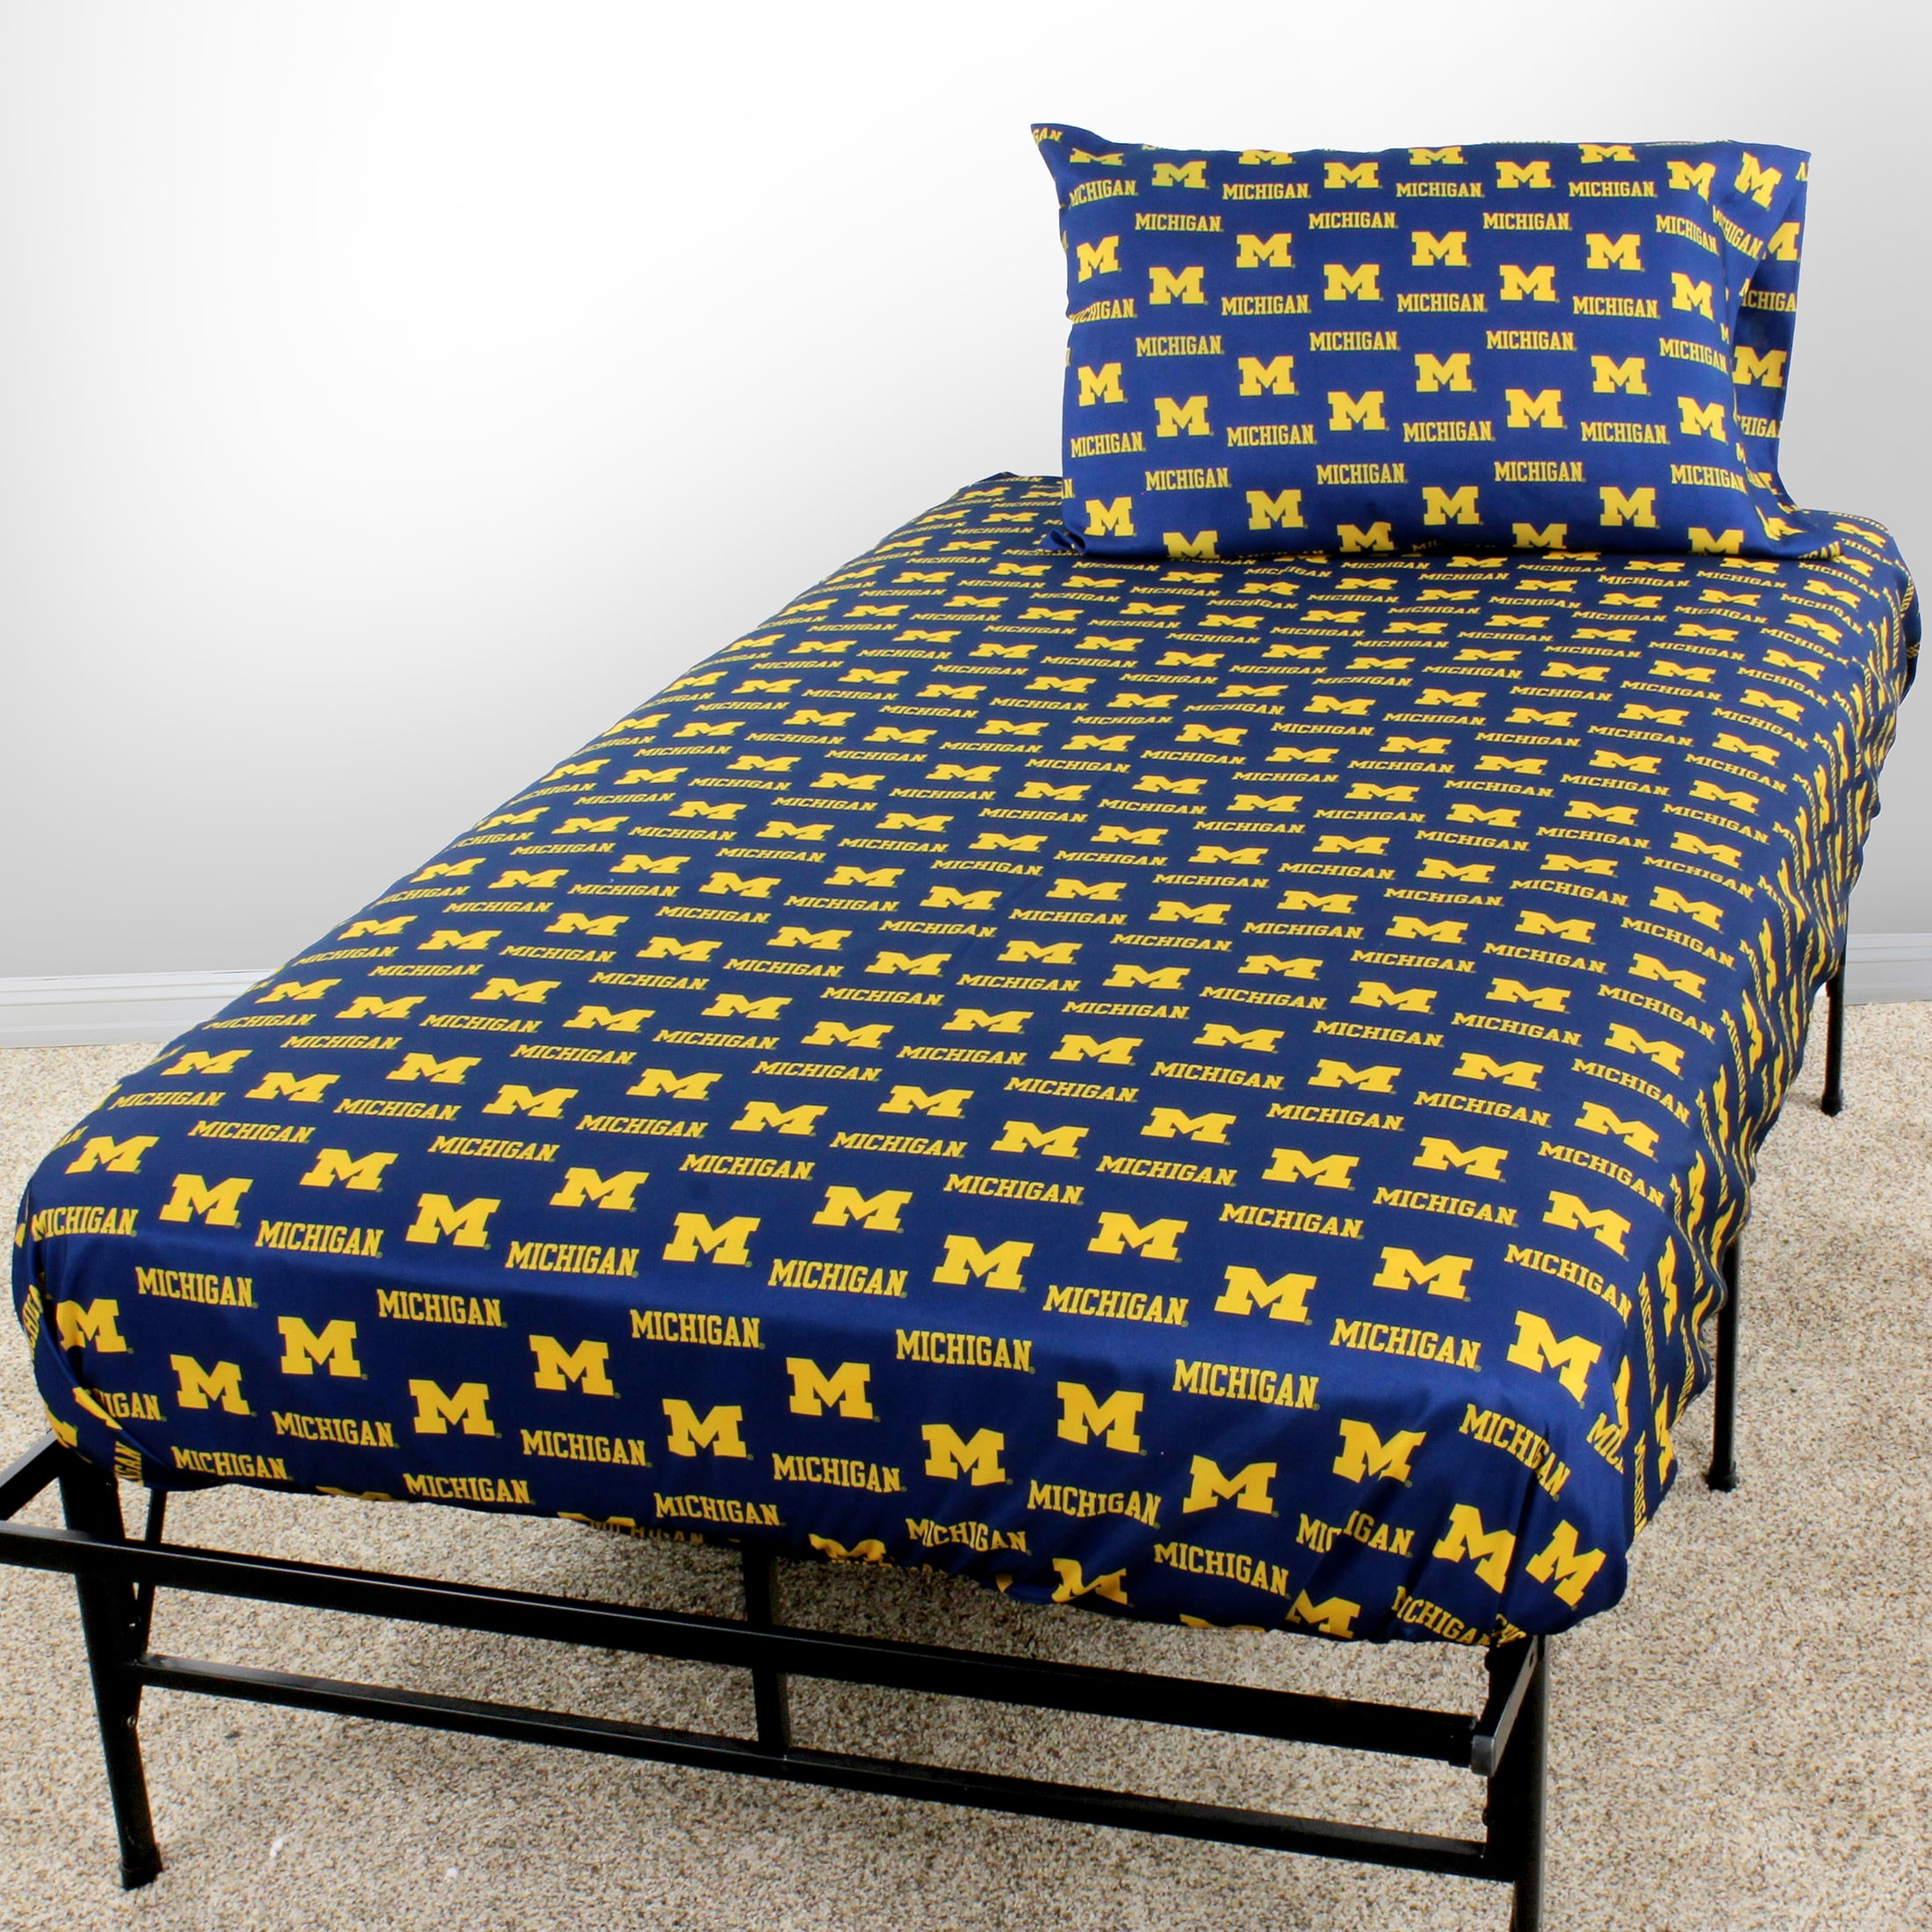 NCAA Michigan Wolverines 5pc BEDDING SET Queen Bed in a Bag 